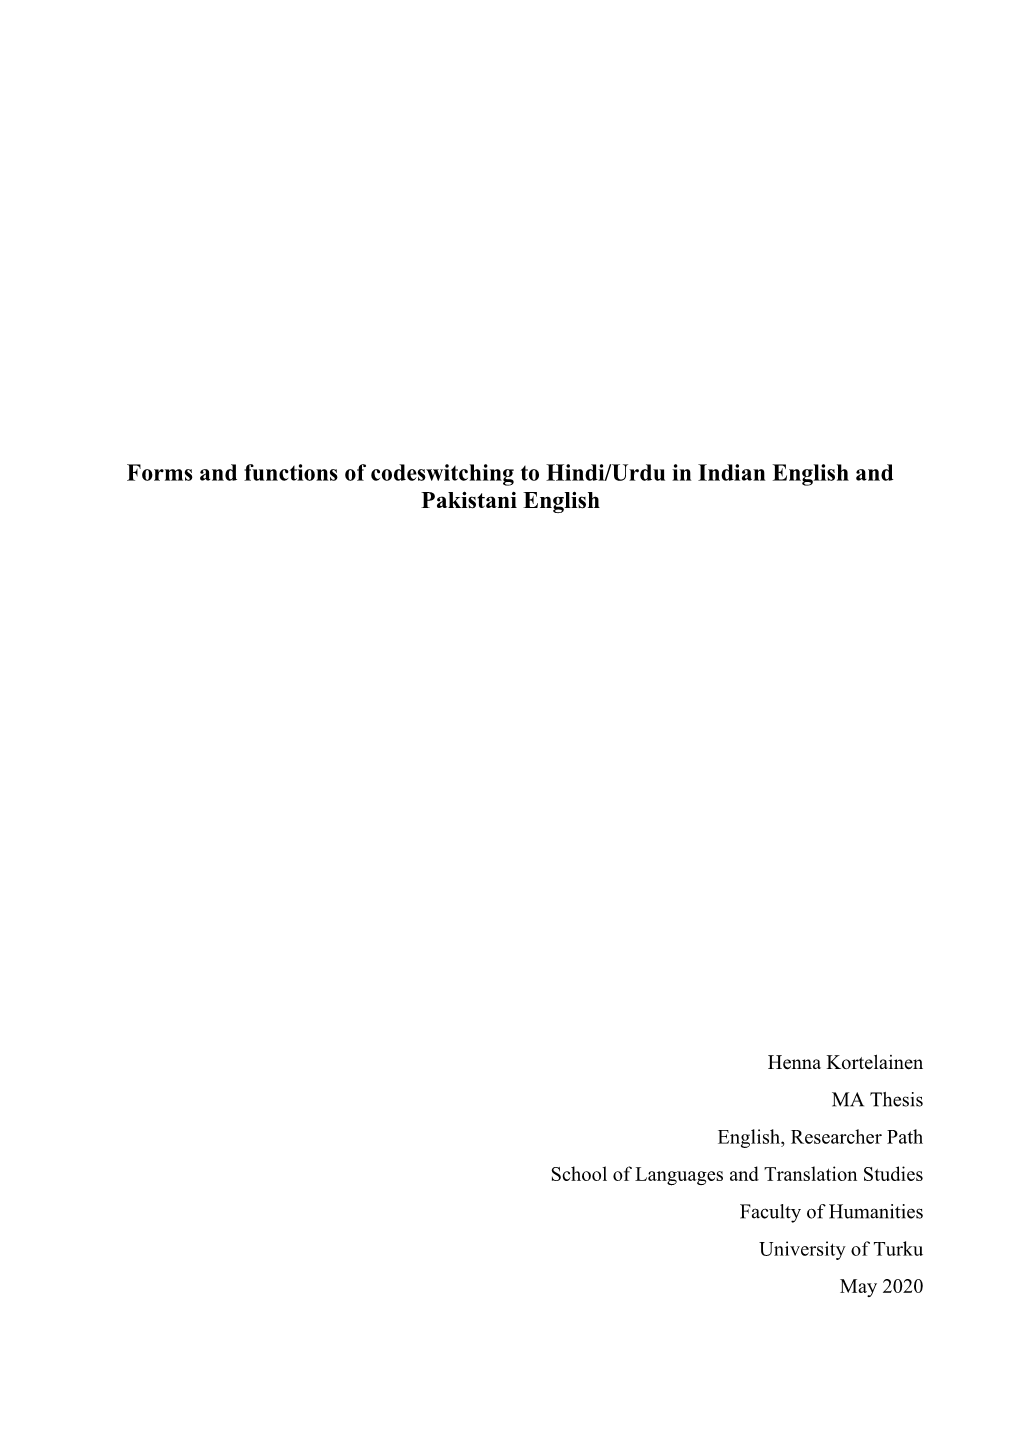 Forms and Functions of Codeswitching to Hindi/Urdu in Indian English and Pakistani English